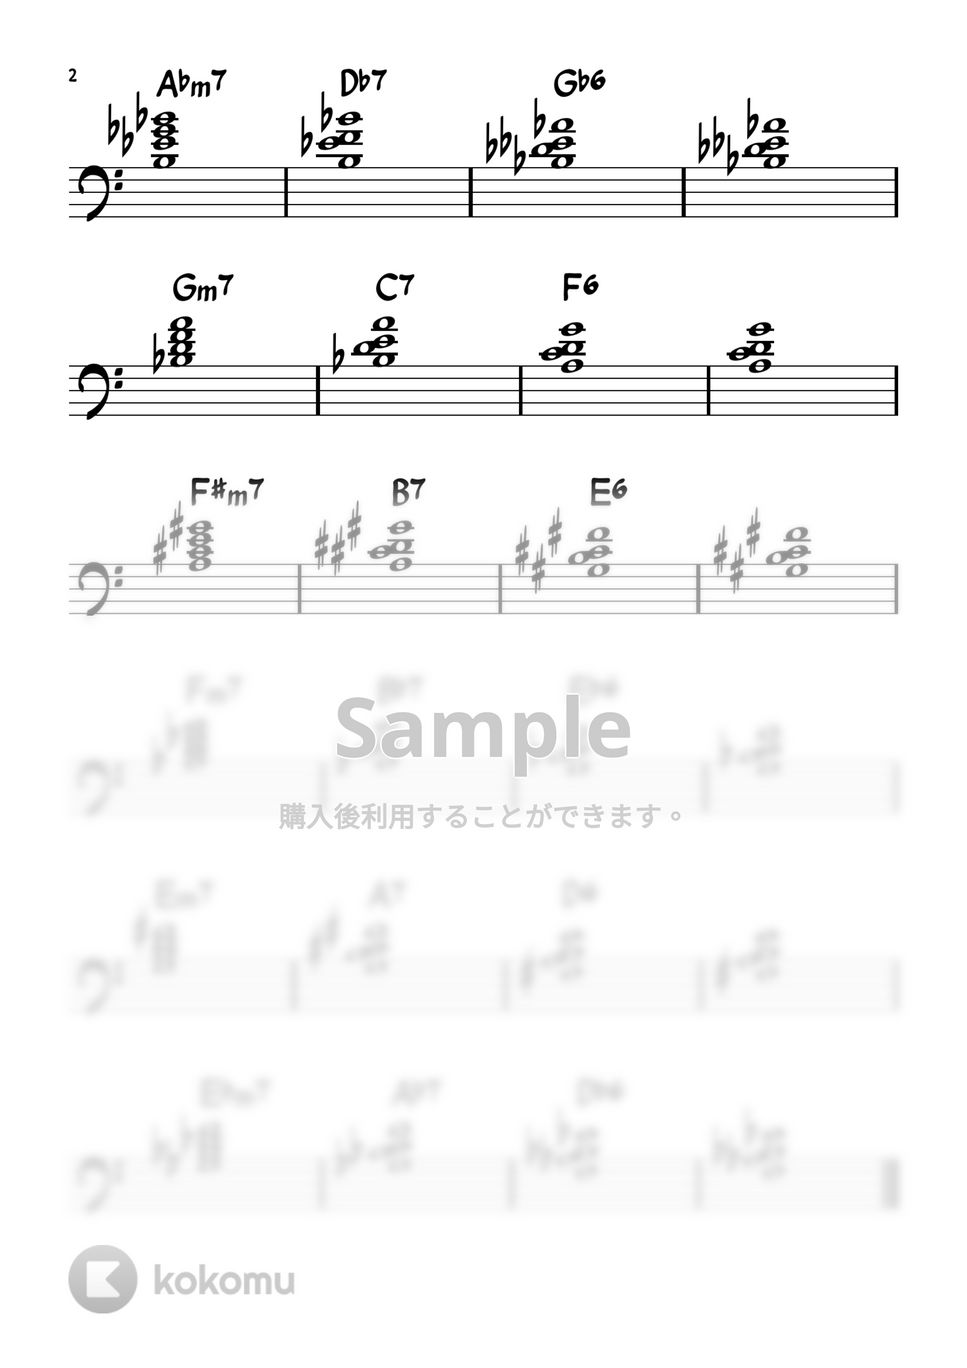 shimarinmarket - major 2-5-1 ①3579 half tone↓exercise (for the left hand practice)